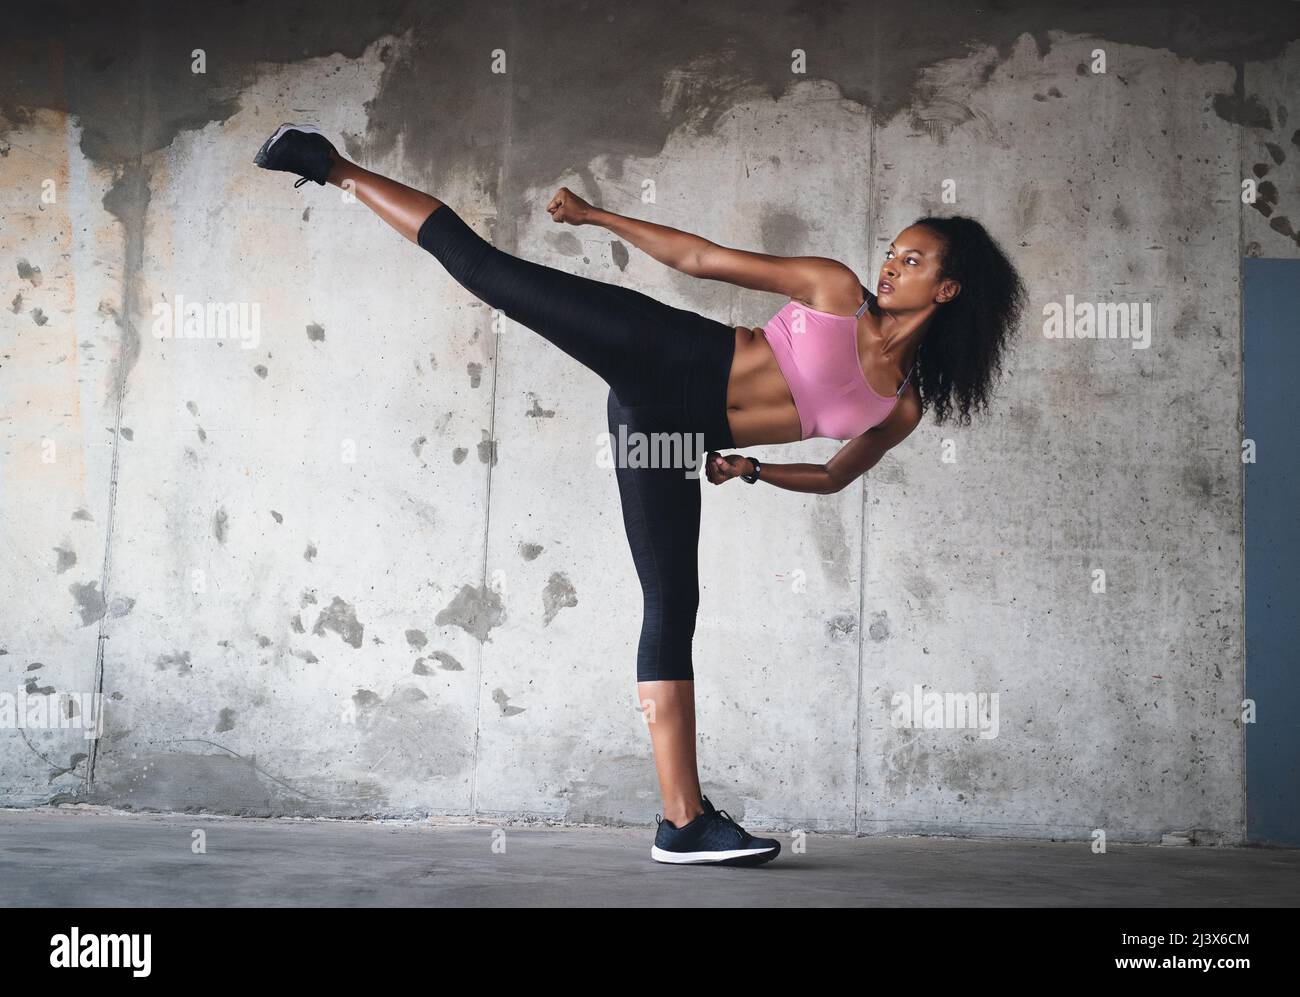 Balance is everything. Full length shot of a young sportswoman kicking up her leg in the air while exercising inside a parking lot. Stock Photo